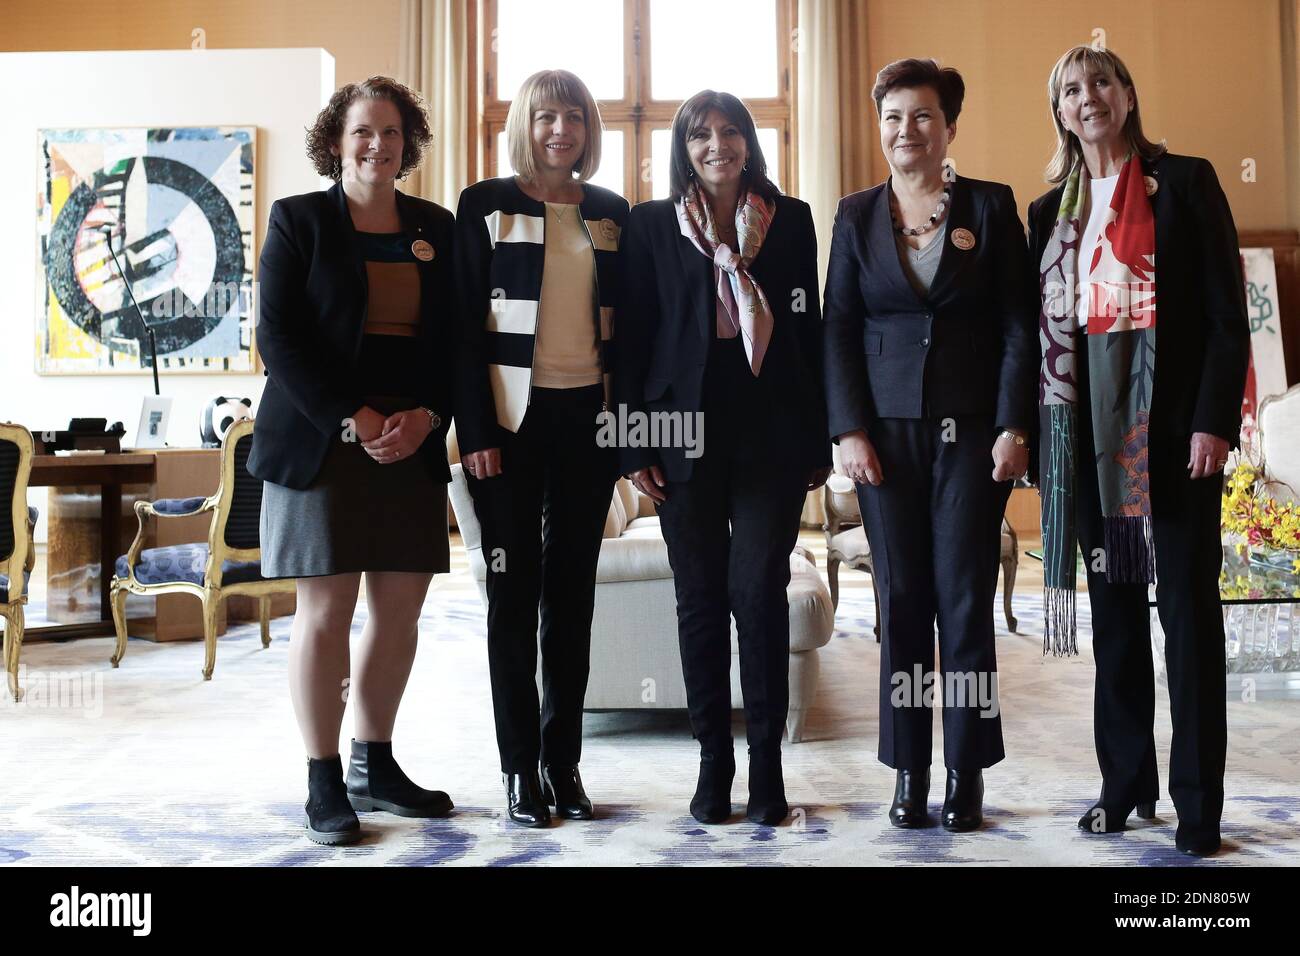 Paris mayor Anne Hidalgo (C) poses for a family photo in her Hotel de Ville offices with other European women mayors, (L-R) Karin Wanngard from Stockholm, Sweden, Jordanka Fandakova from Sofia, Bulgaria, Hanna Gronkiewicz from Warsaw, Poland and Lydie Polfer-Wurth from Luxembourg, at the end of the Summit of European Mayors for Climate, ahead of the United Nations Climate Change Conference, COP21 to be held at Le Bourget site near Paris from 30 November to 11 December 2015, in Paris, France on March 26, 2015. Photo by Stephane Lemouton/ABACAPRESS.COM Stock Photo